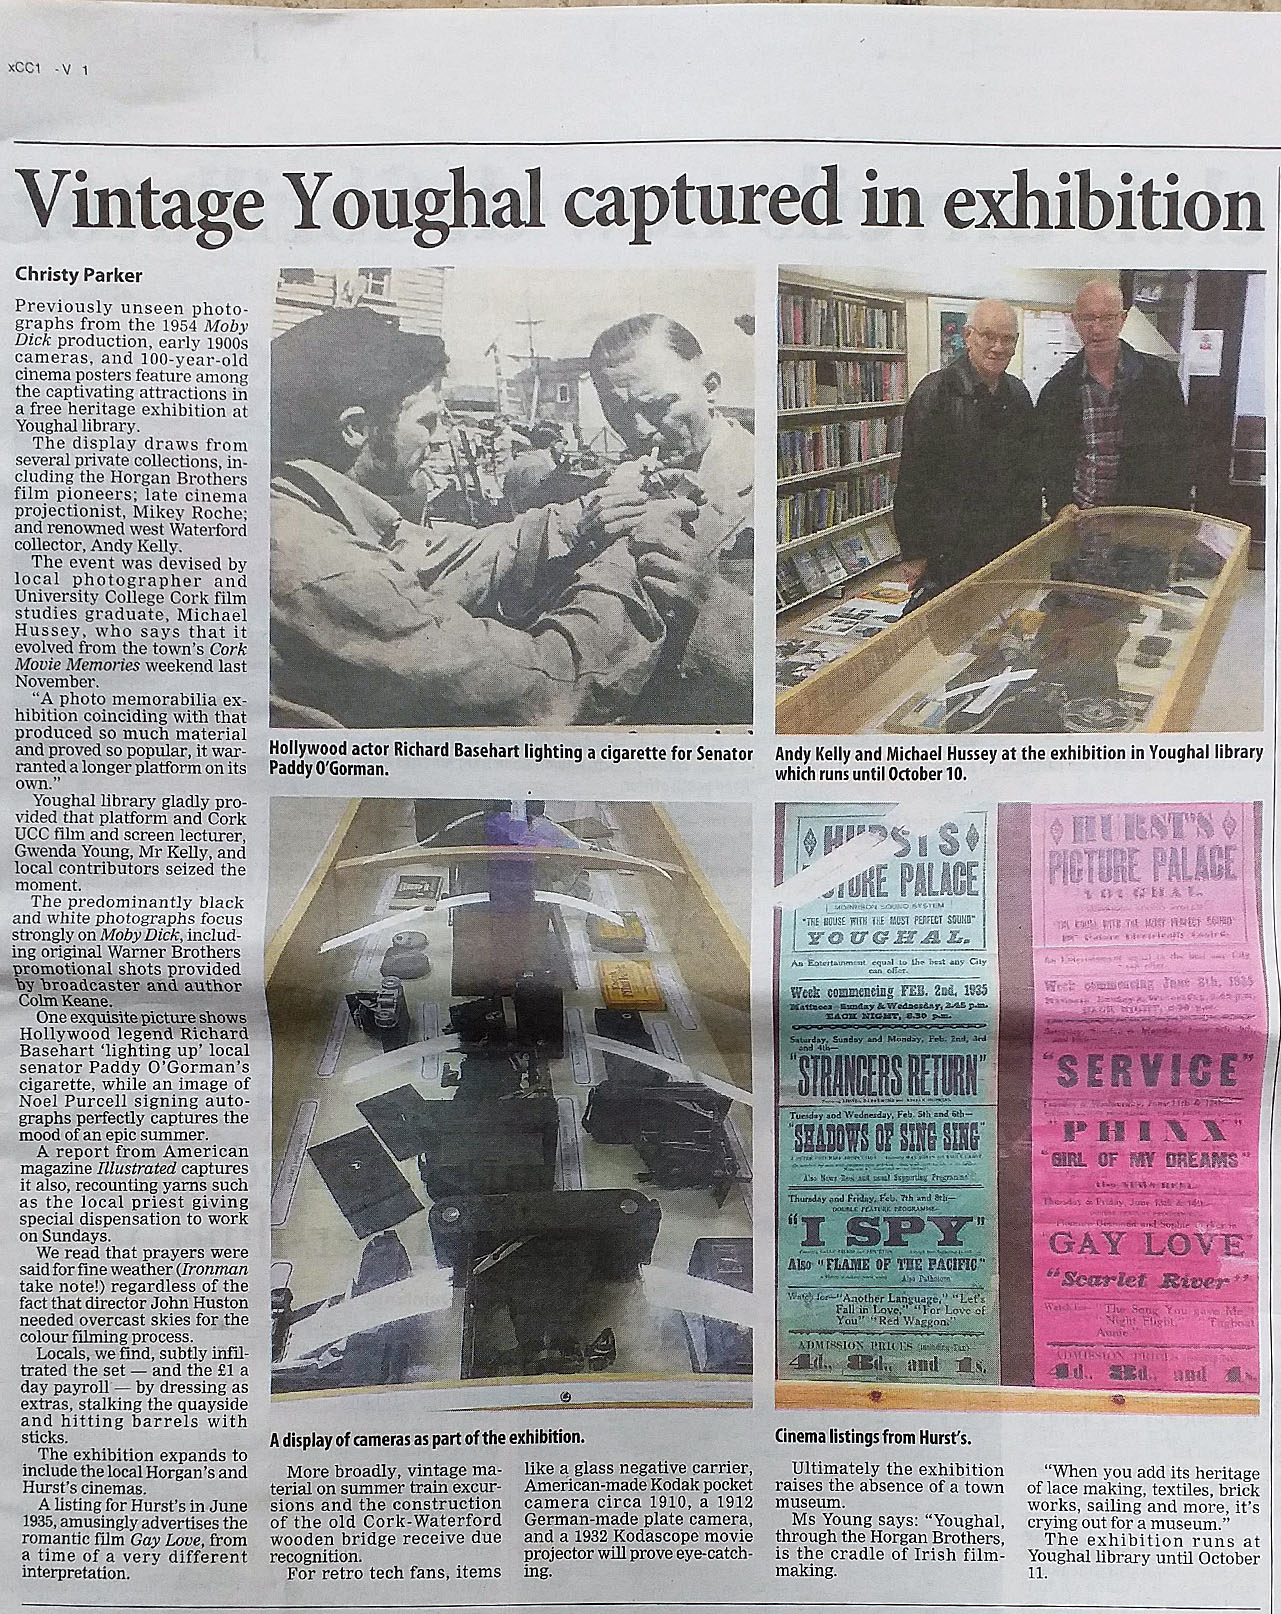 New exhibition on cinema and cinema-going in Youghal, curated by Mr. Michael Hussey. Youghal Library. Sep 20th - Oct 11th.